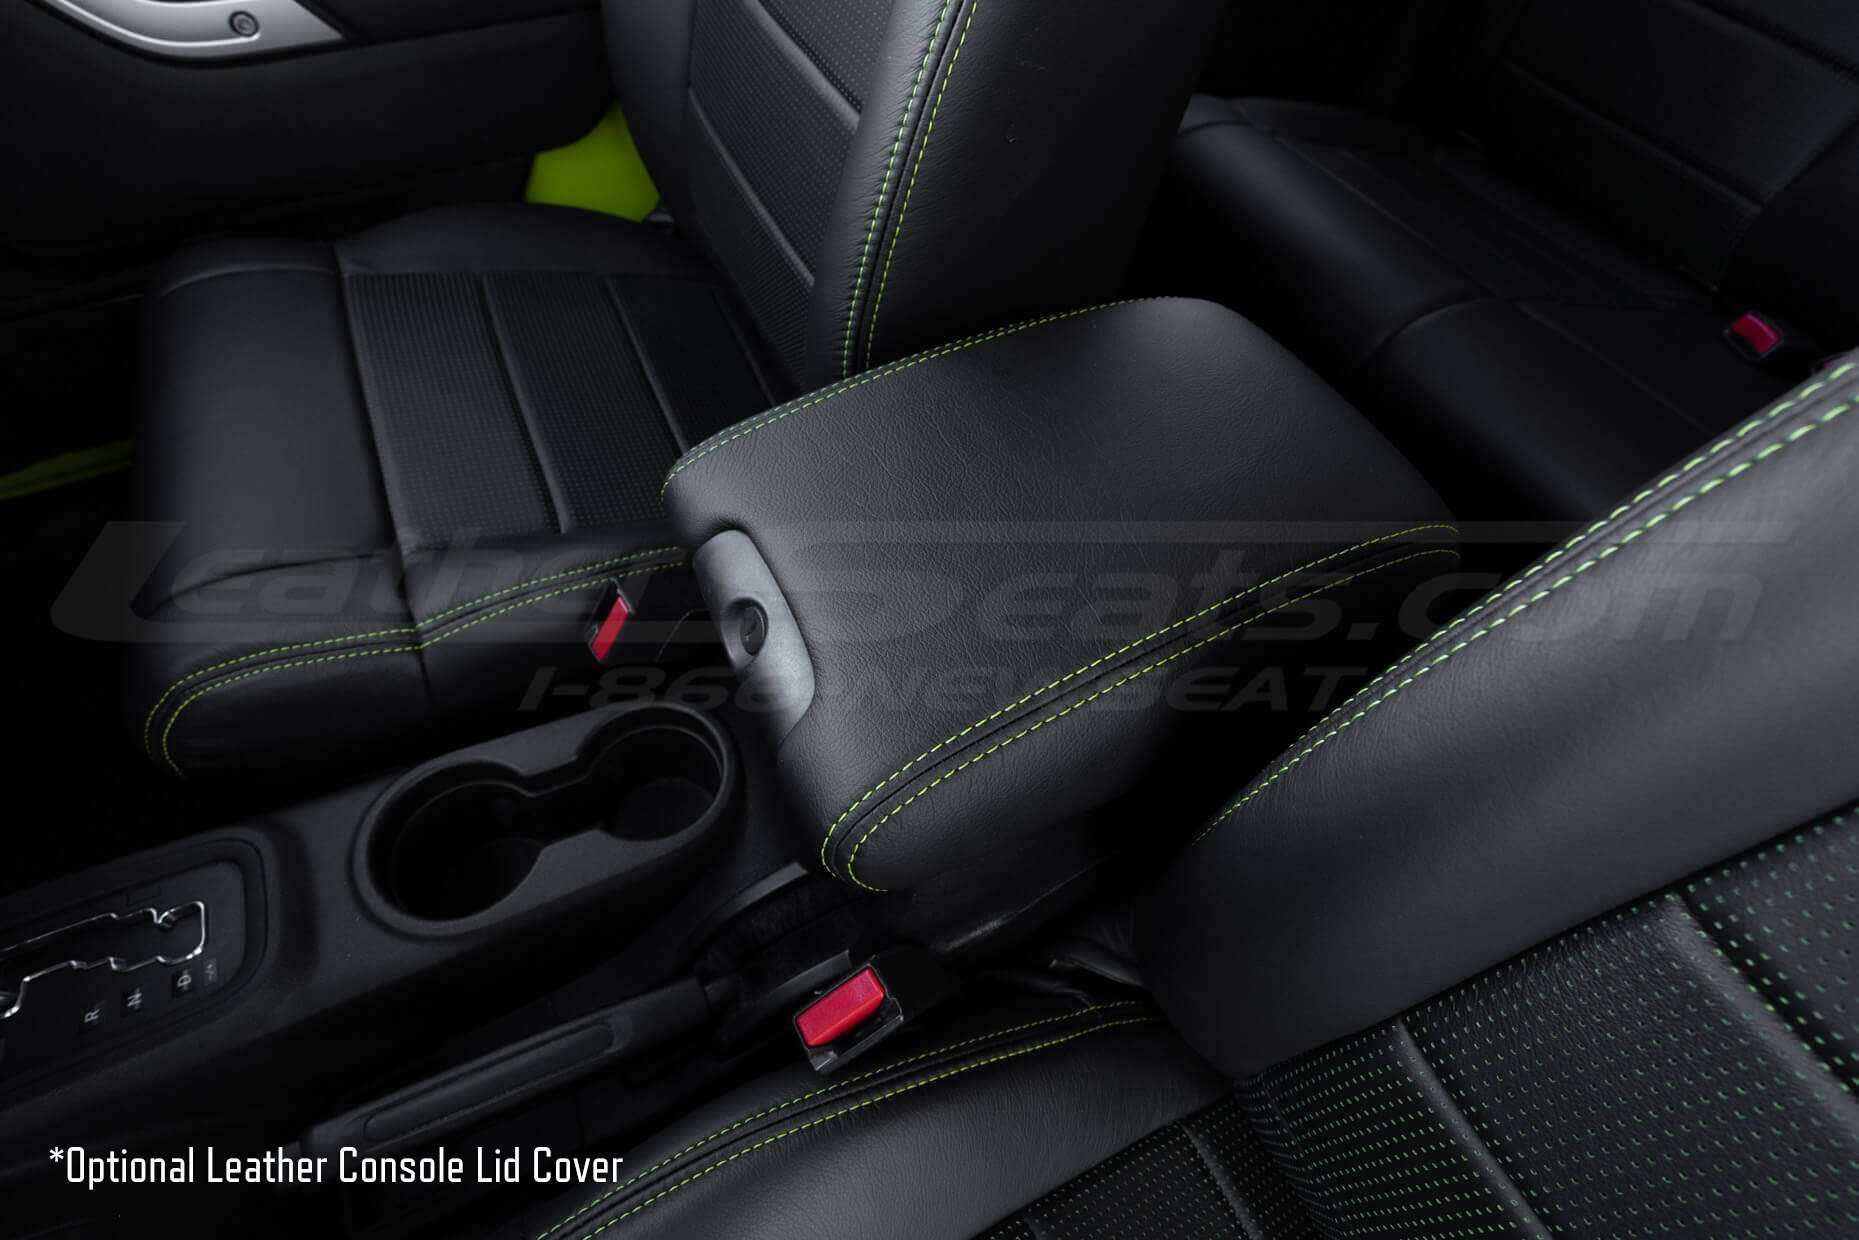 Optional Leather Console Lid Cover in Black with Lime Green stitching for Jeep Wrangler JK